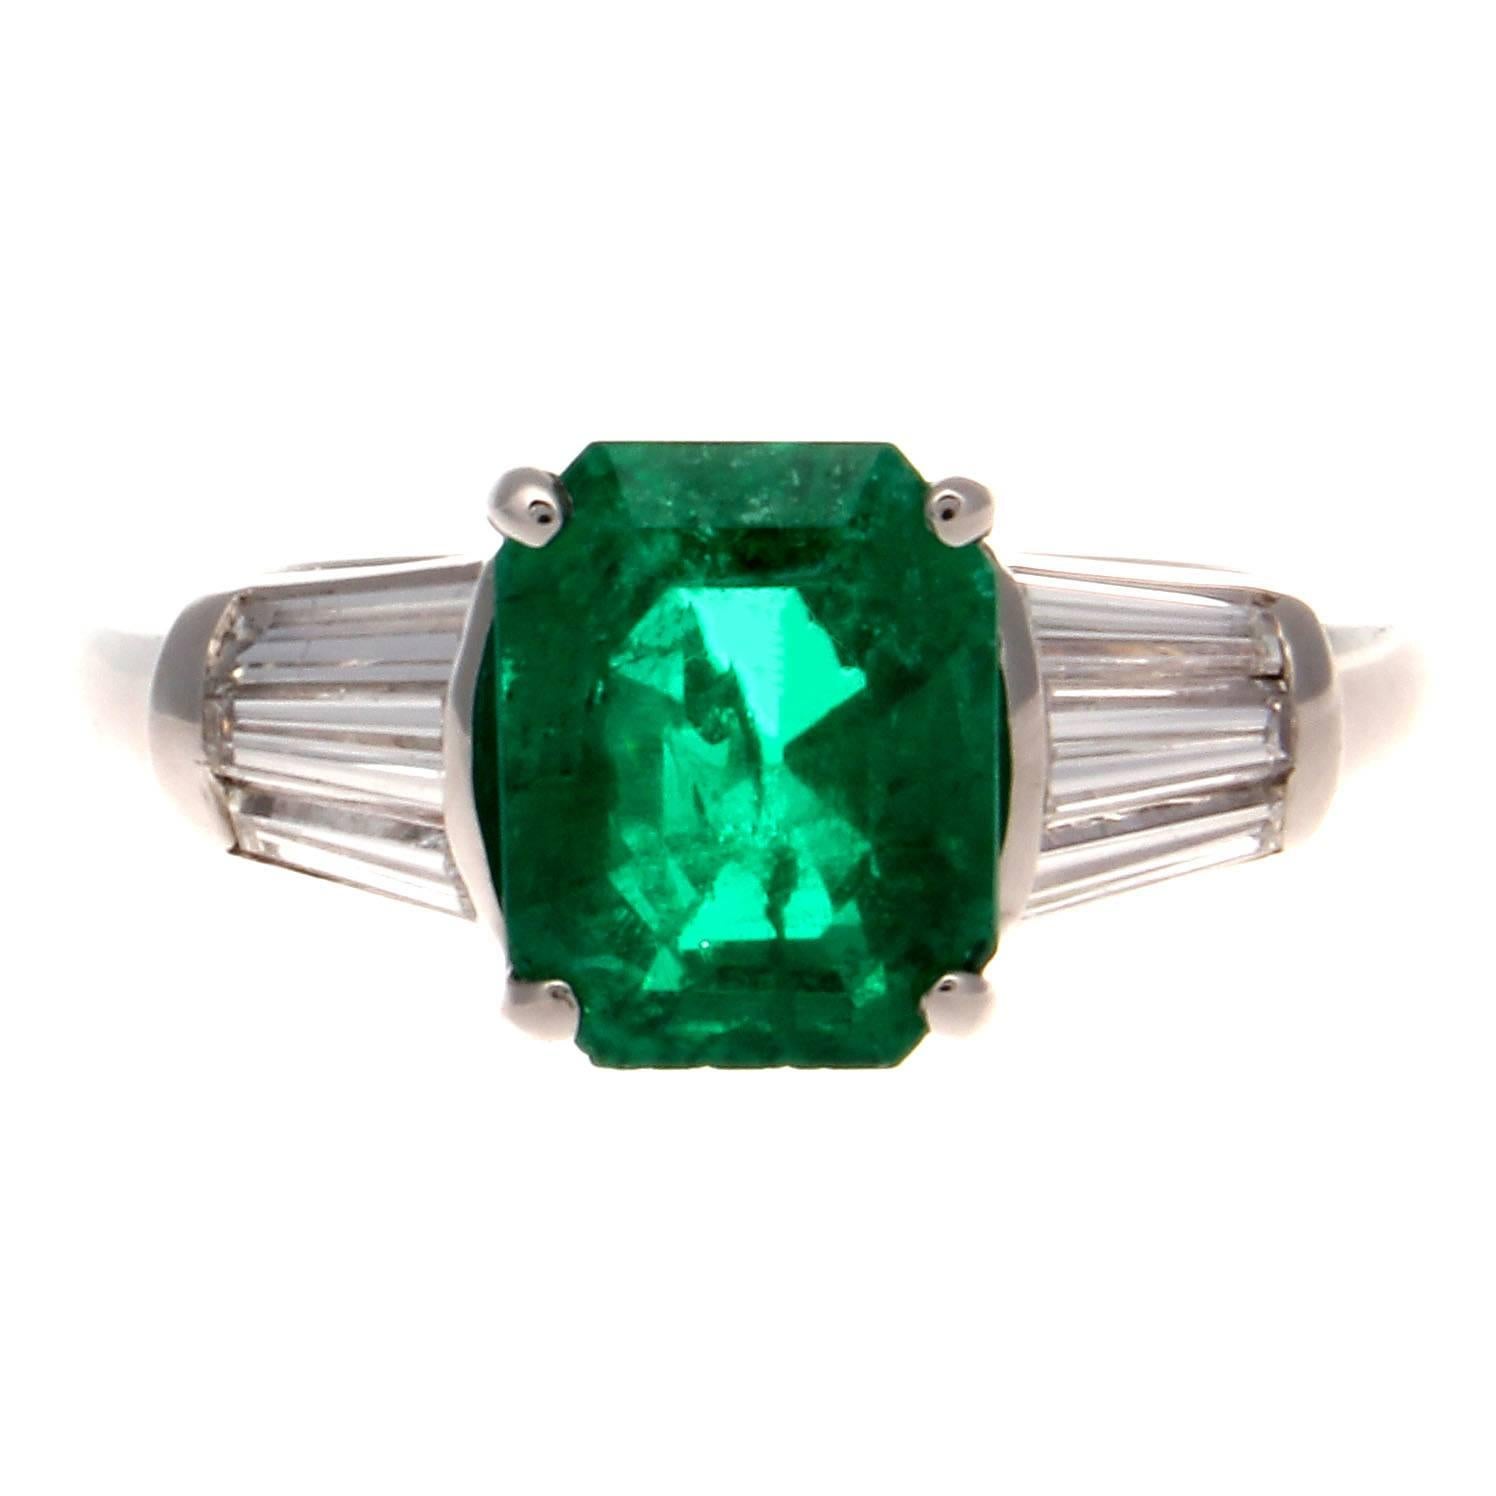 Embracing the ideology of traditional engagement rings while orchestrating a modern flare. Featuring a 2.54 carat emerald that radiates a rich forest green color that collectors lust for. Accompanied with an AGL certificate stating it is of